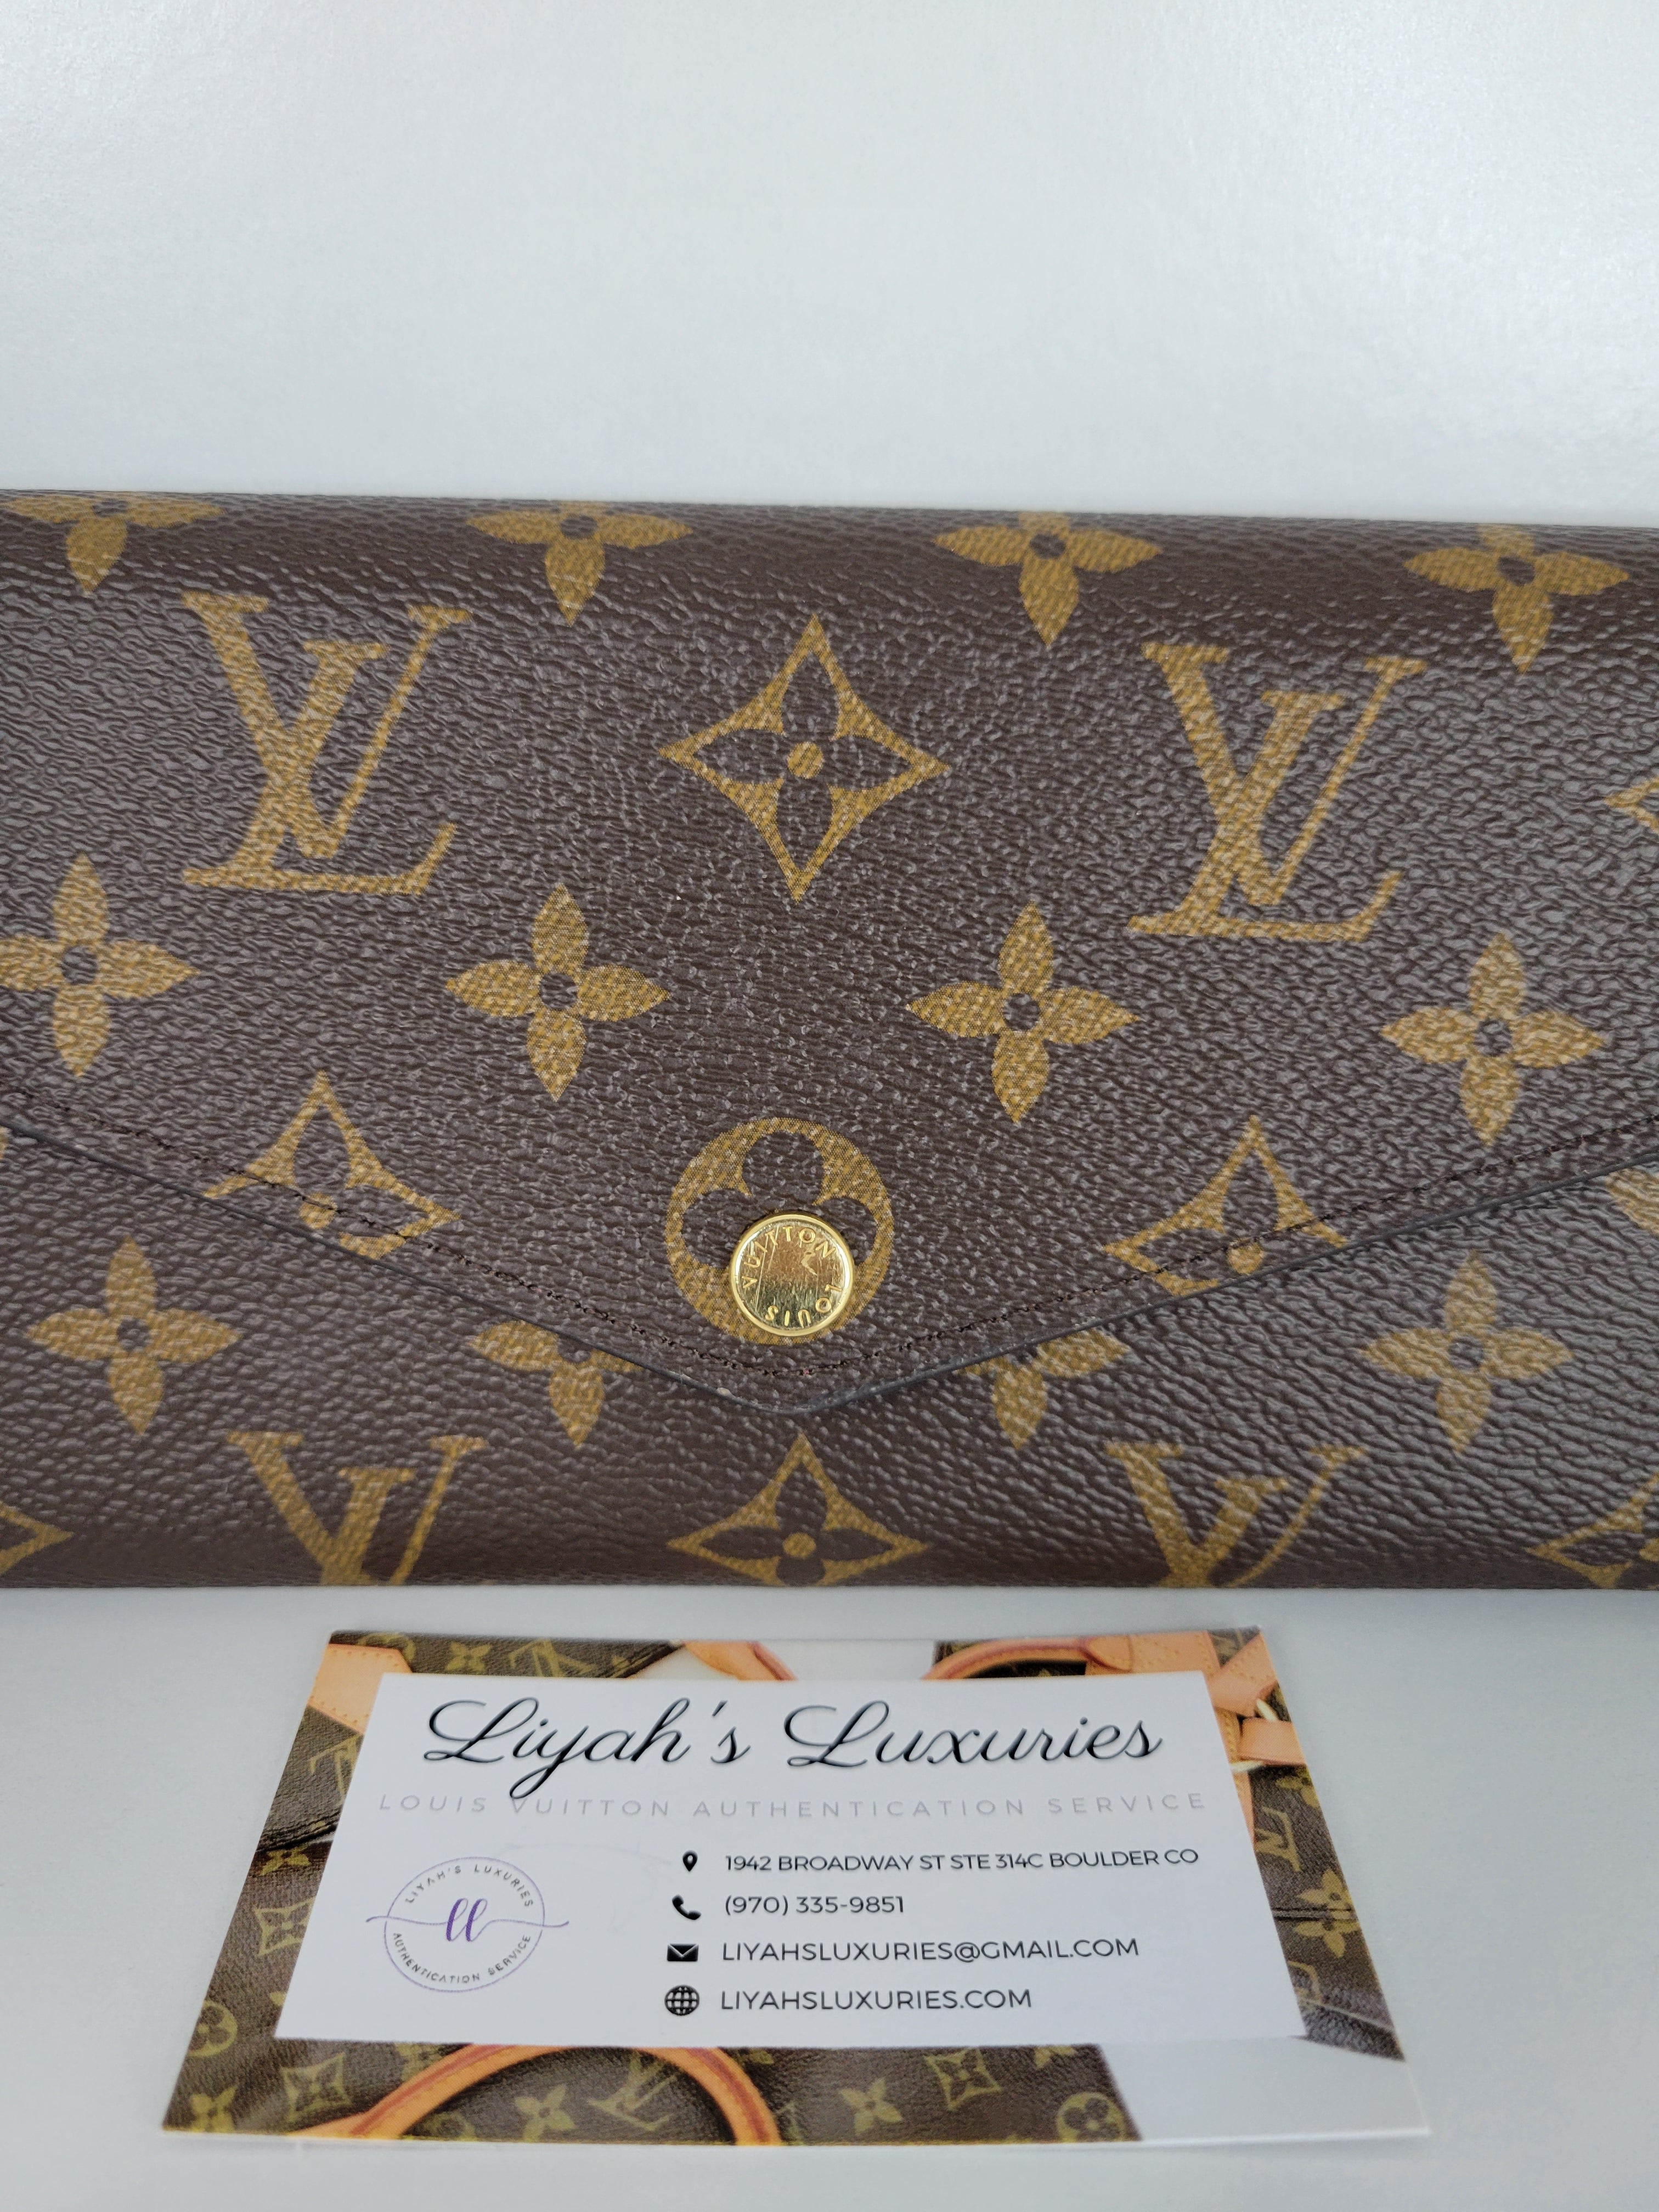 Chia sẻ 71 về louis vuitton authentication services hay nhất   cdgdbentreeduvn